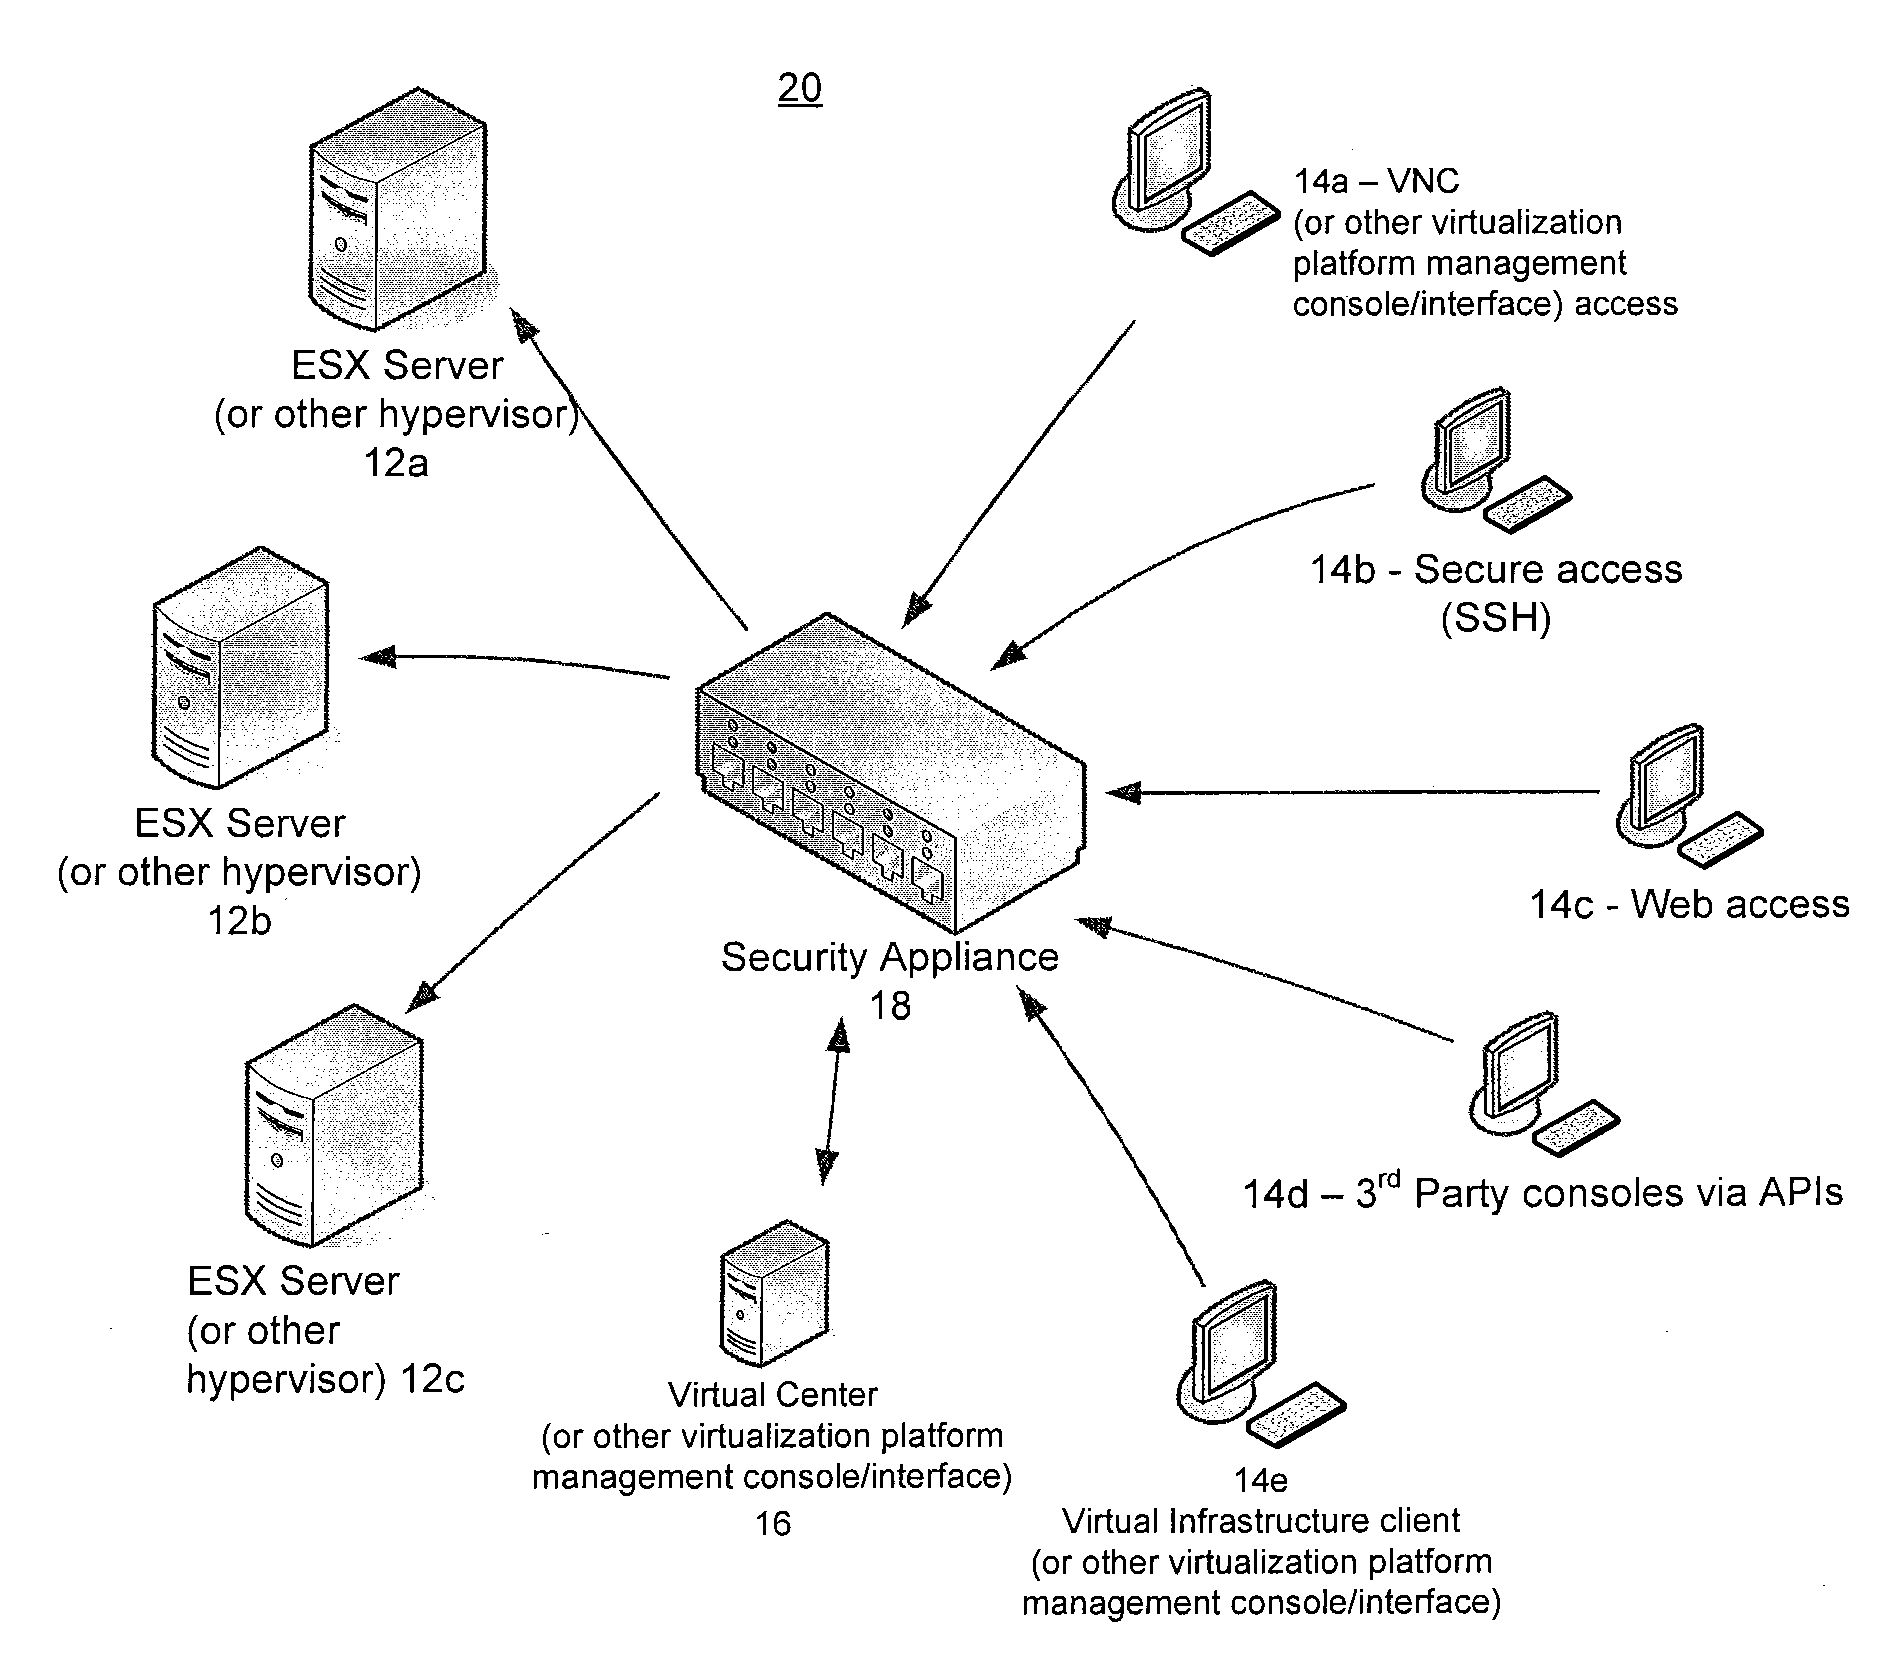 Methods and systems for securely managing virtualization platform